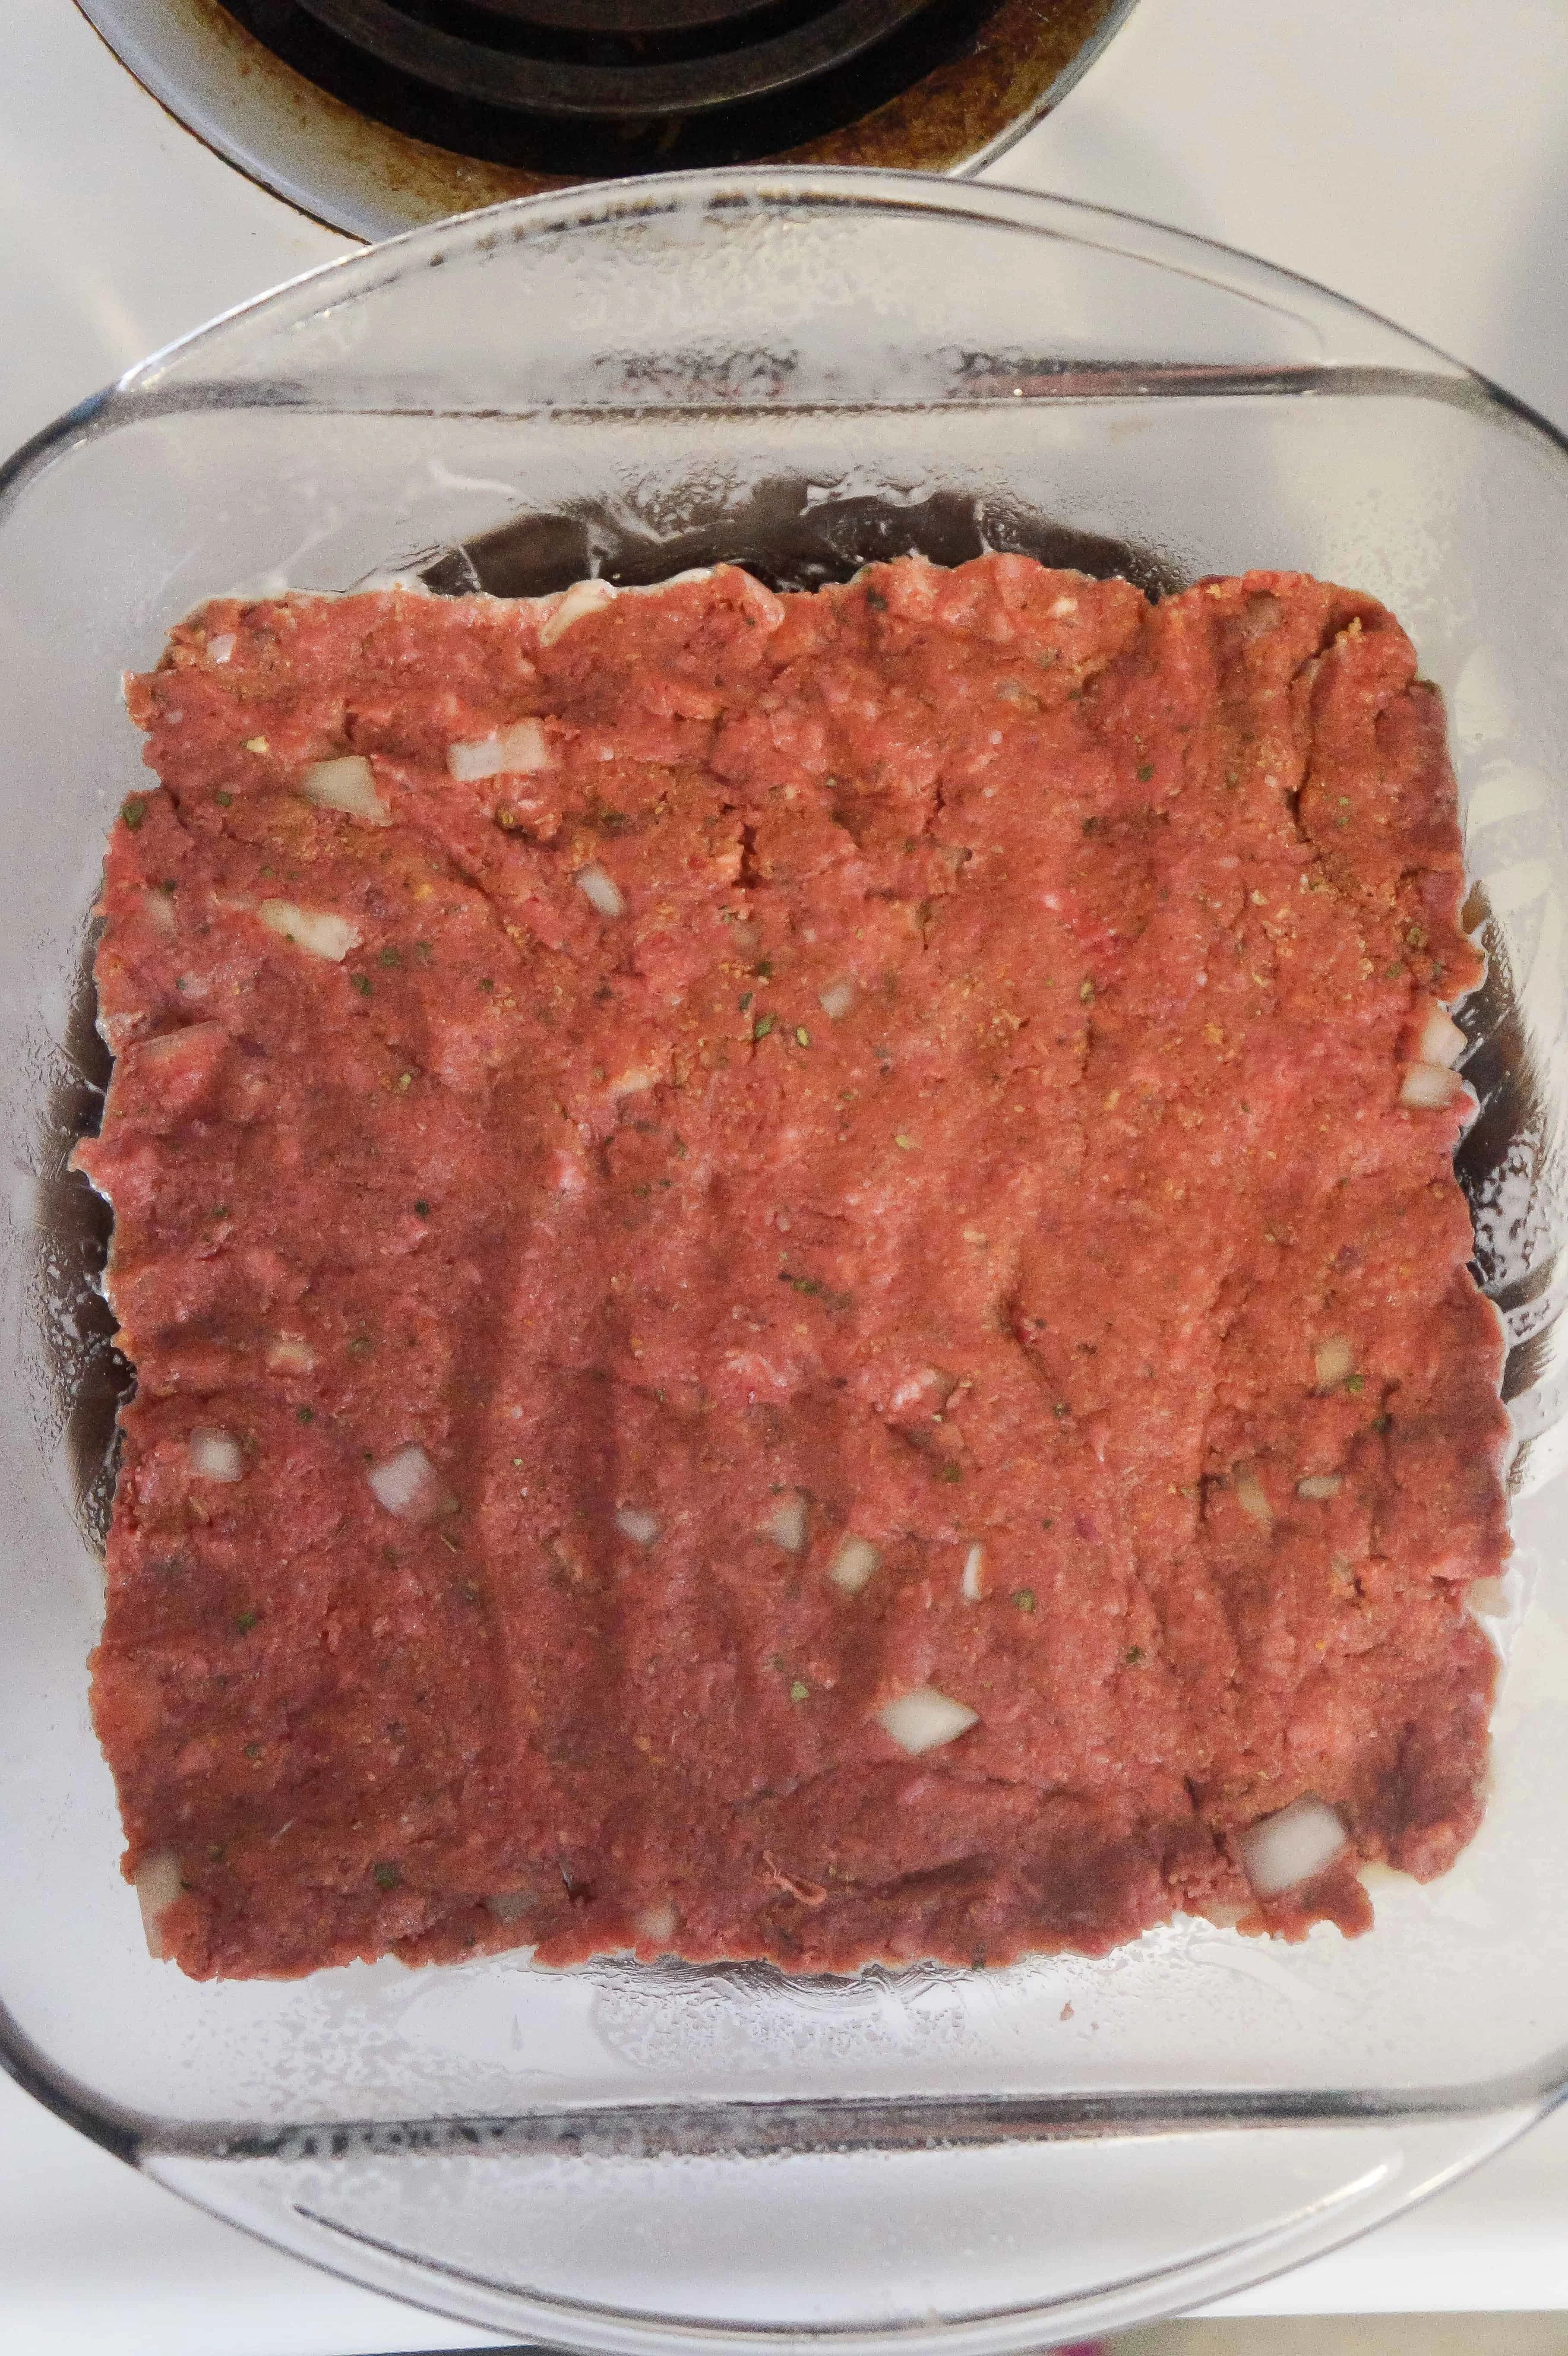 uncooked meatloaf